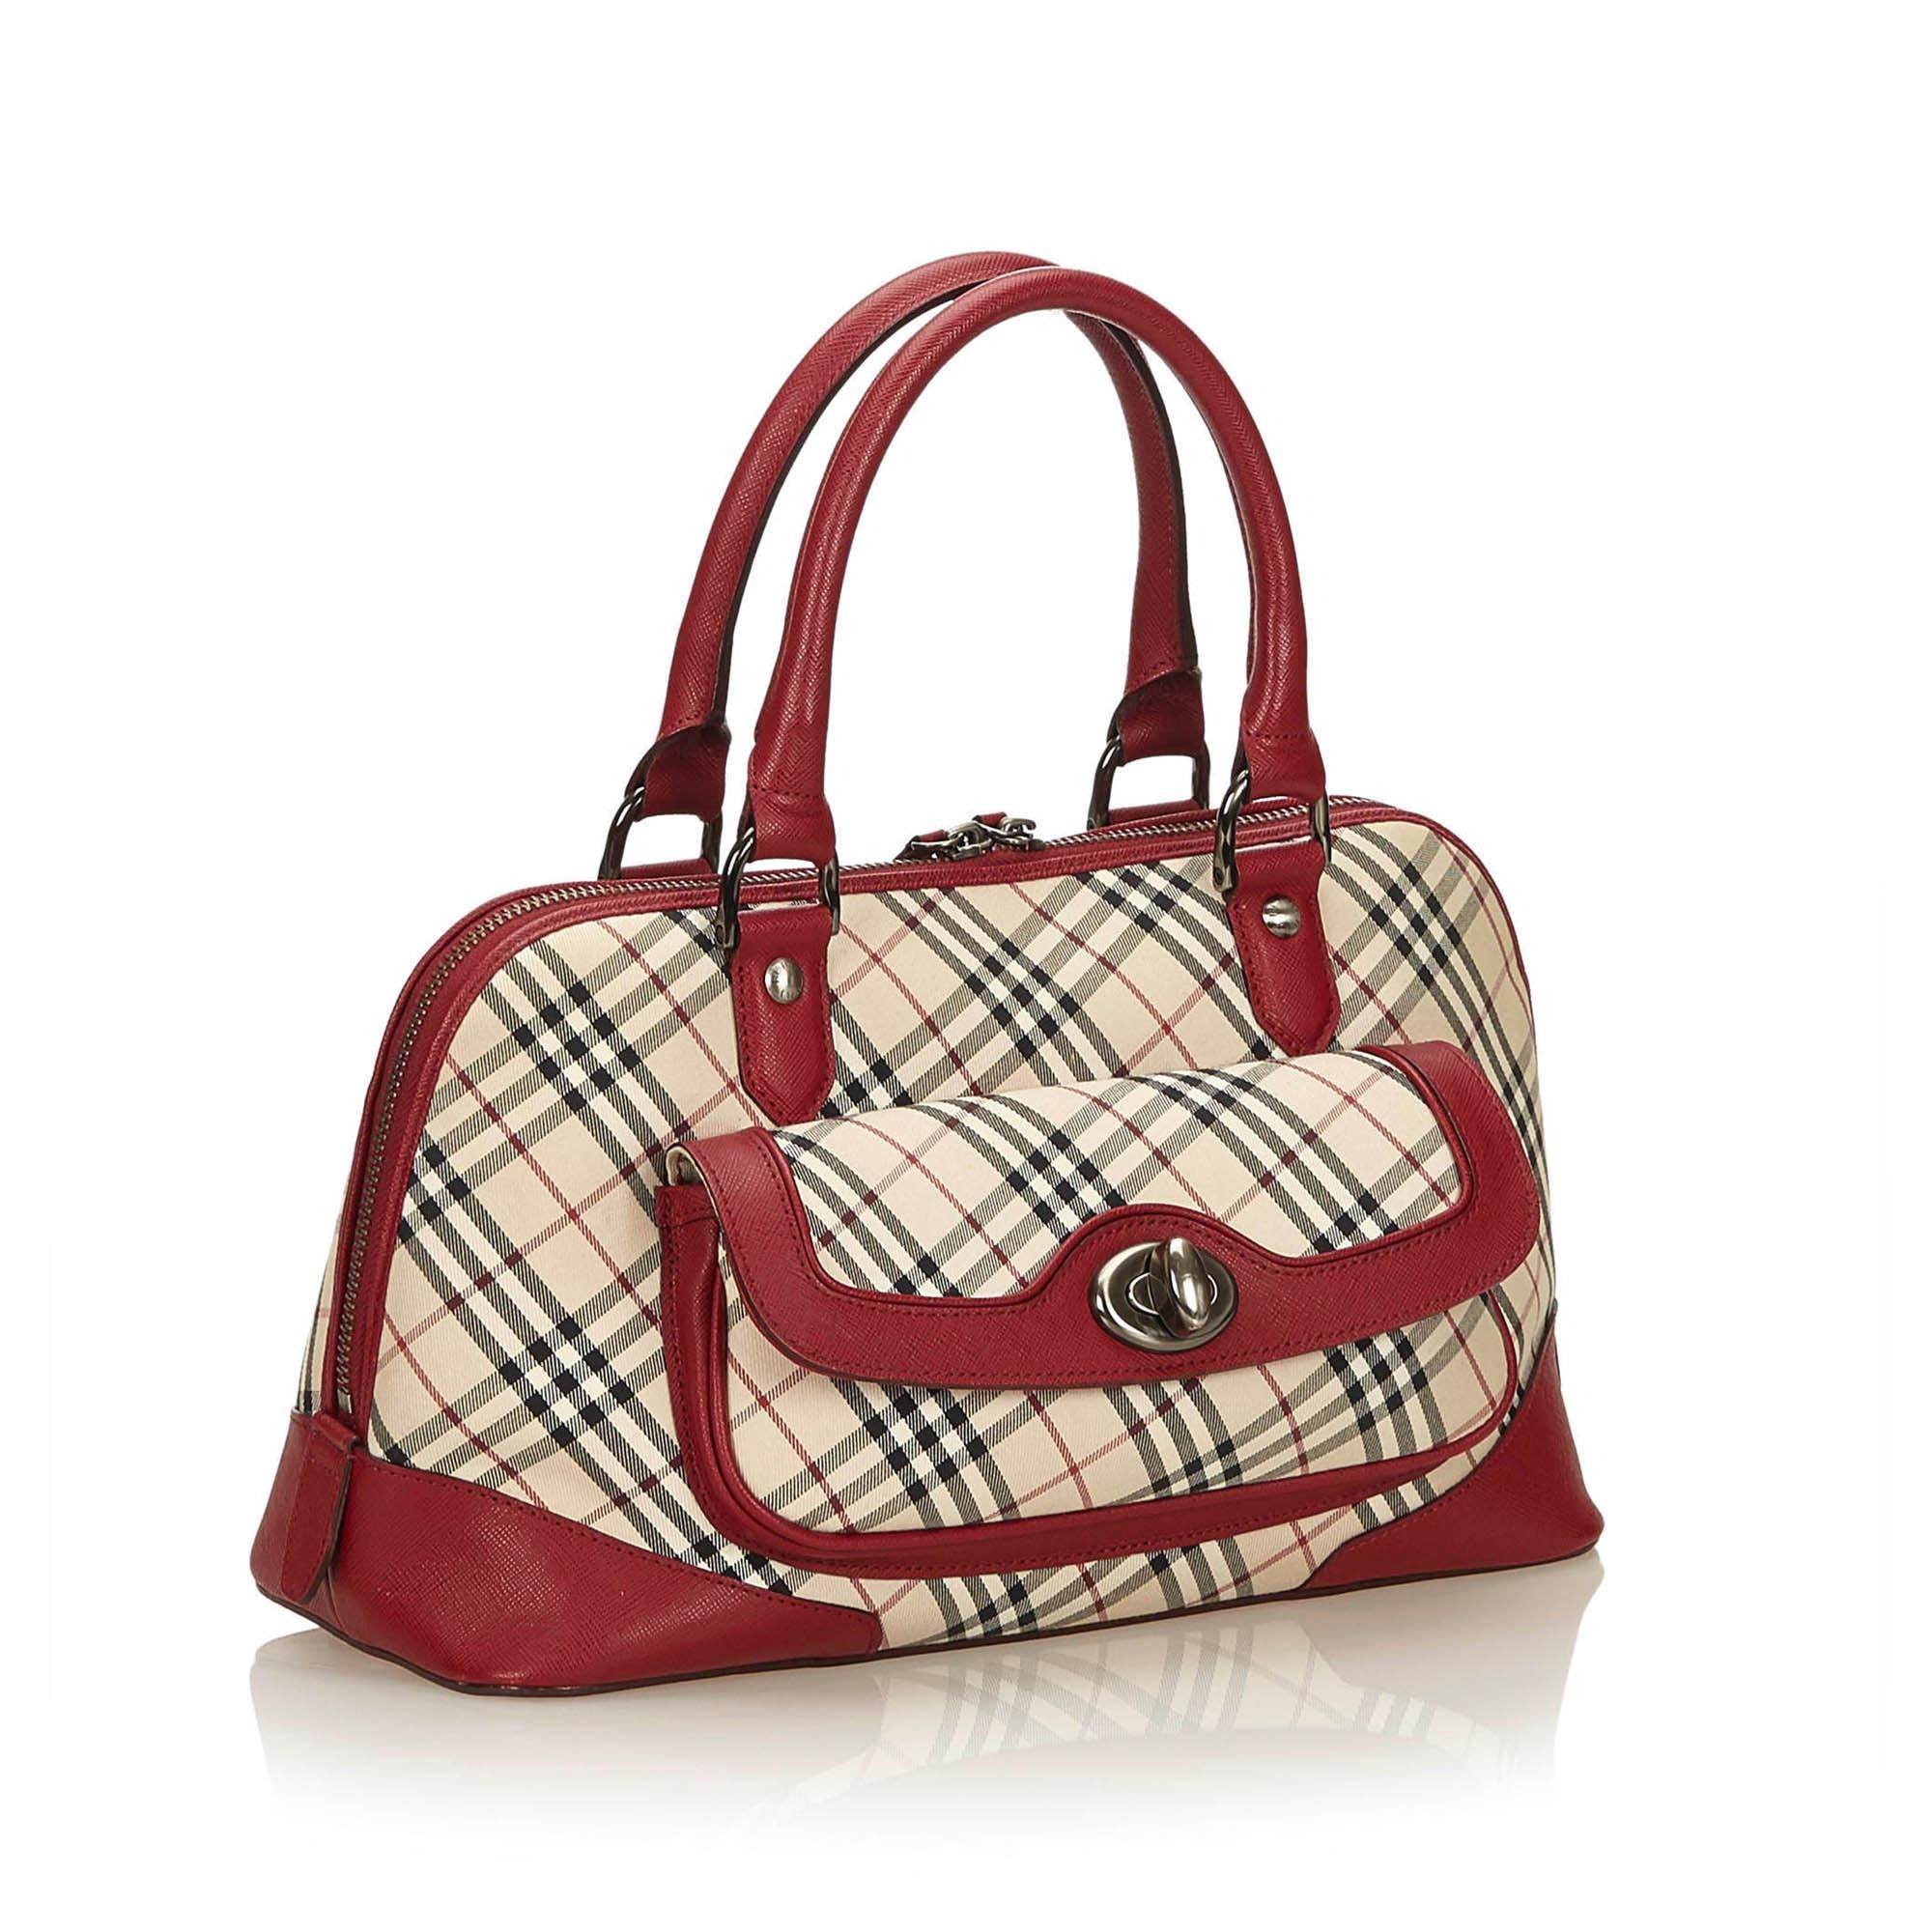 This handbag features a jacquard body, rolled leather handles, top zip closure, exterior flap pocket with twist-lock closure, and interior zip and slip pockets. It carries as A condition rating.

Inclusions: 
This item does not come with